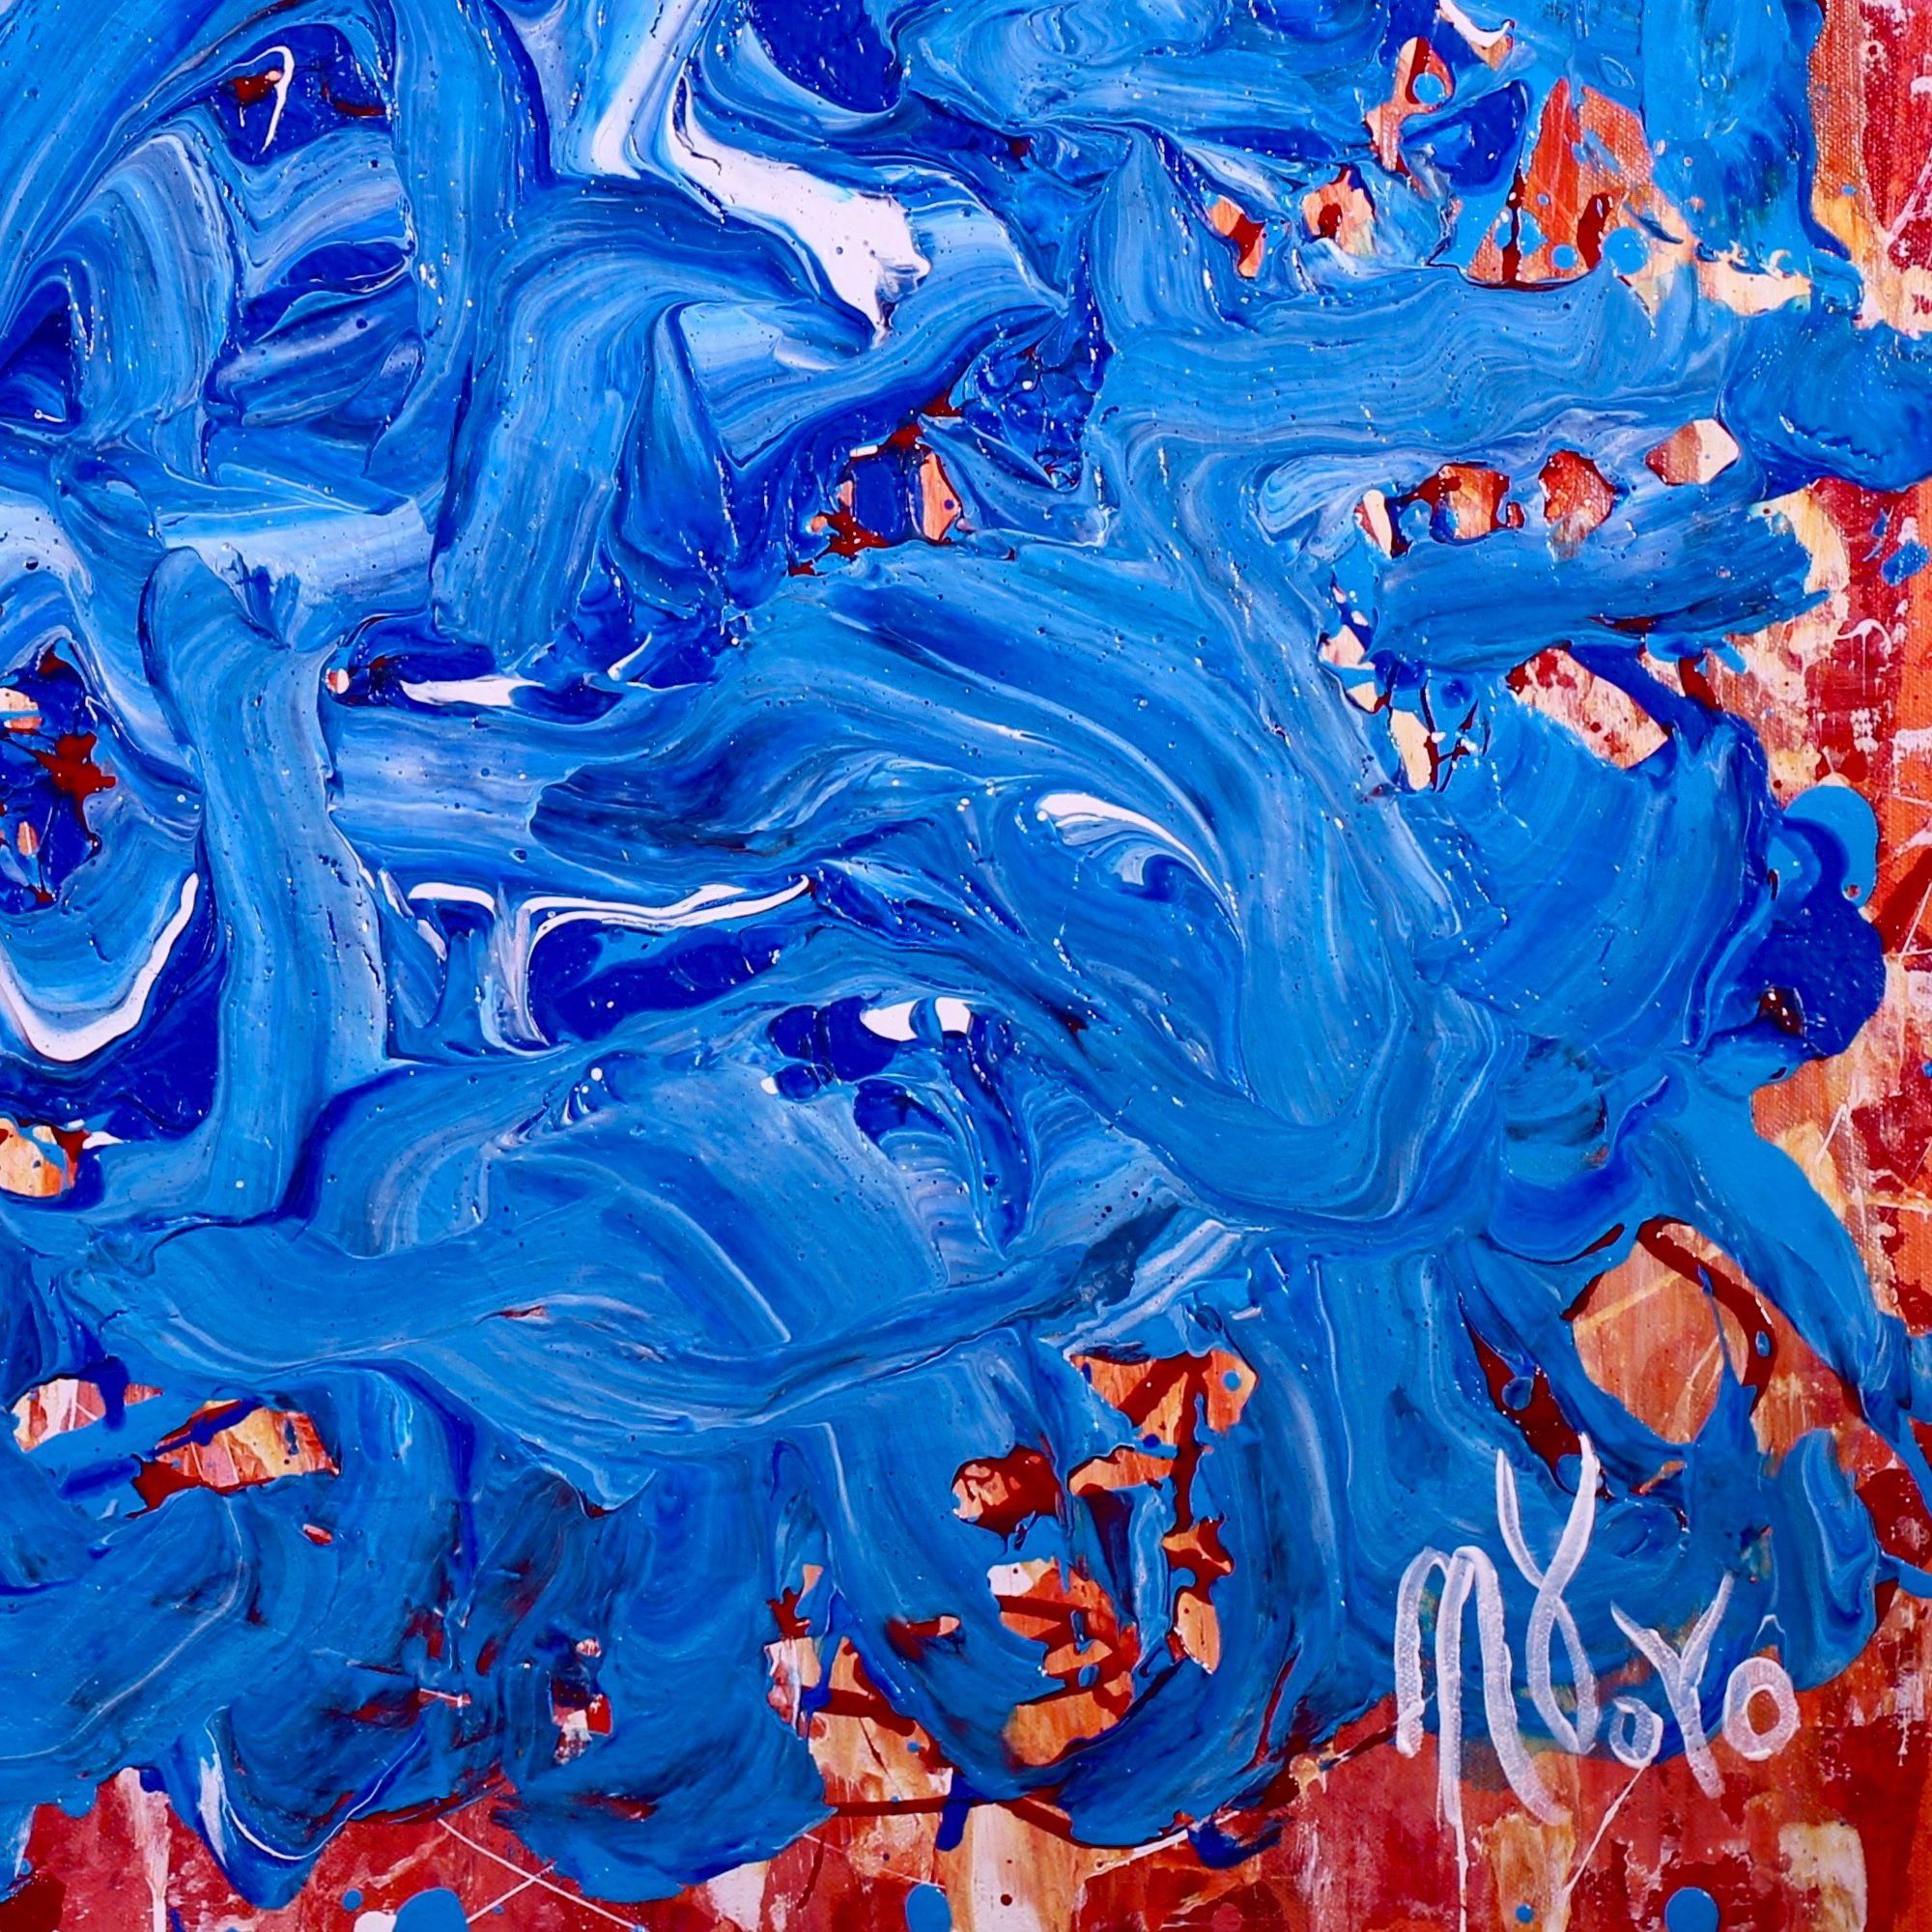 Contemplative, bright, vivid blue with lots of texture and swirls. The focus was texture, color and a composition with energy and movement. High grade Golden acrylics. Signed.     ORIGINAL FINE ABSTRACTS - ONE OF A KIND!  I only make original works.